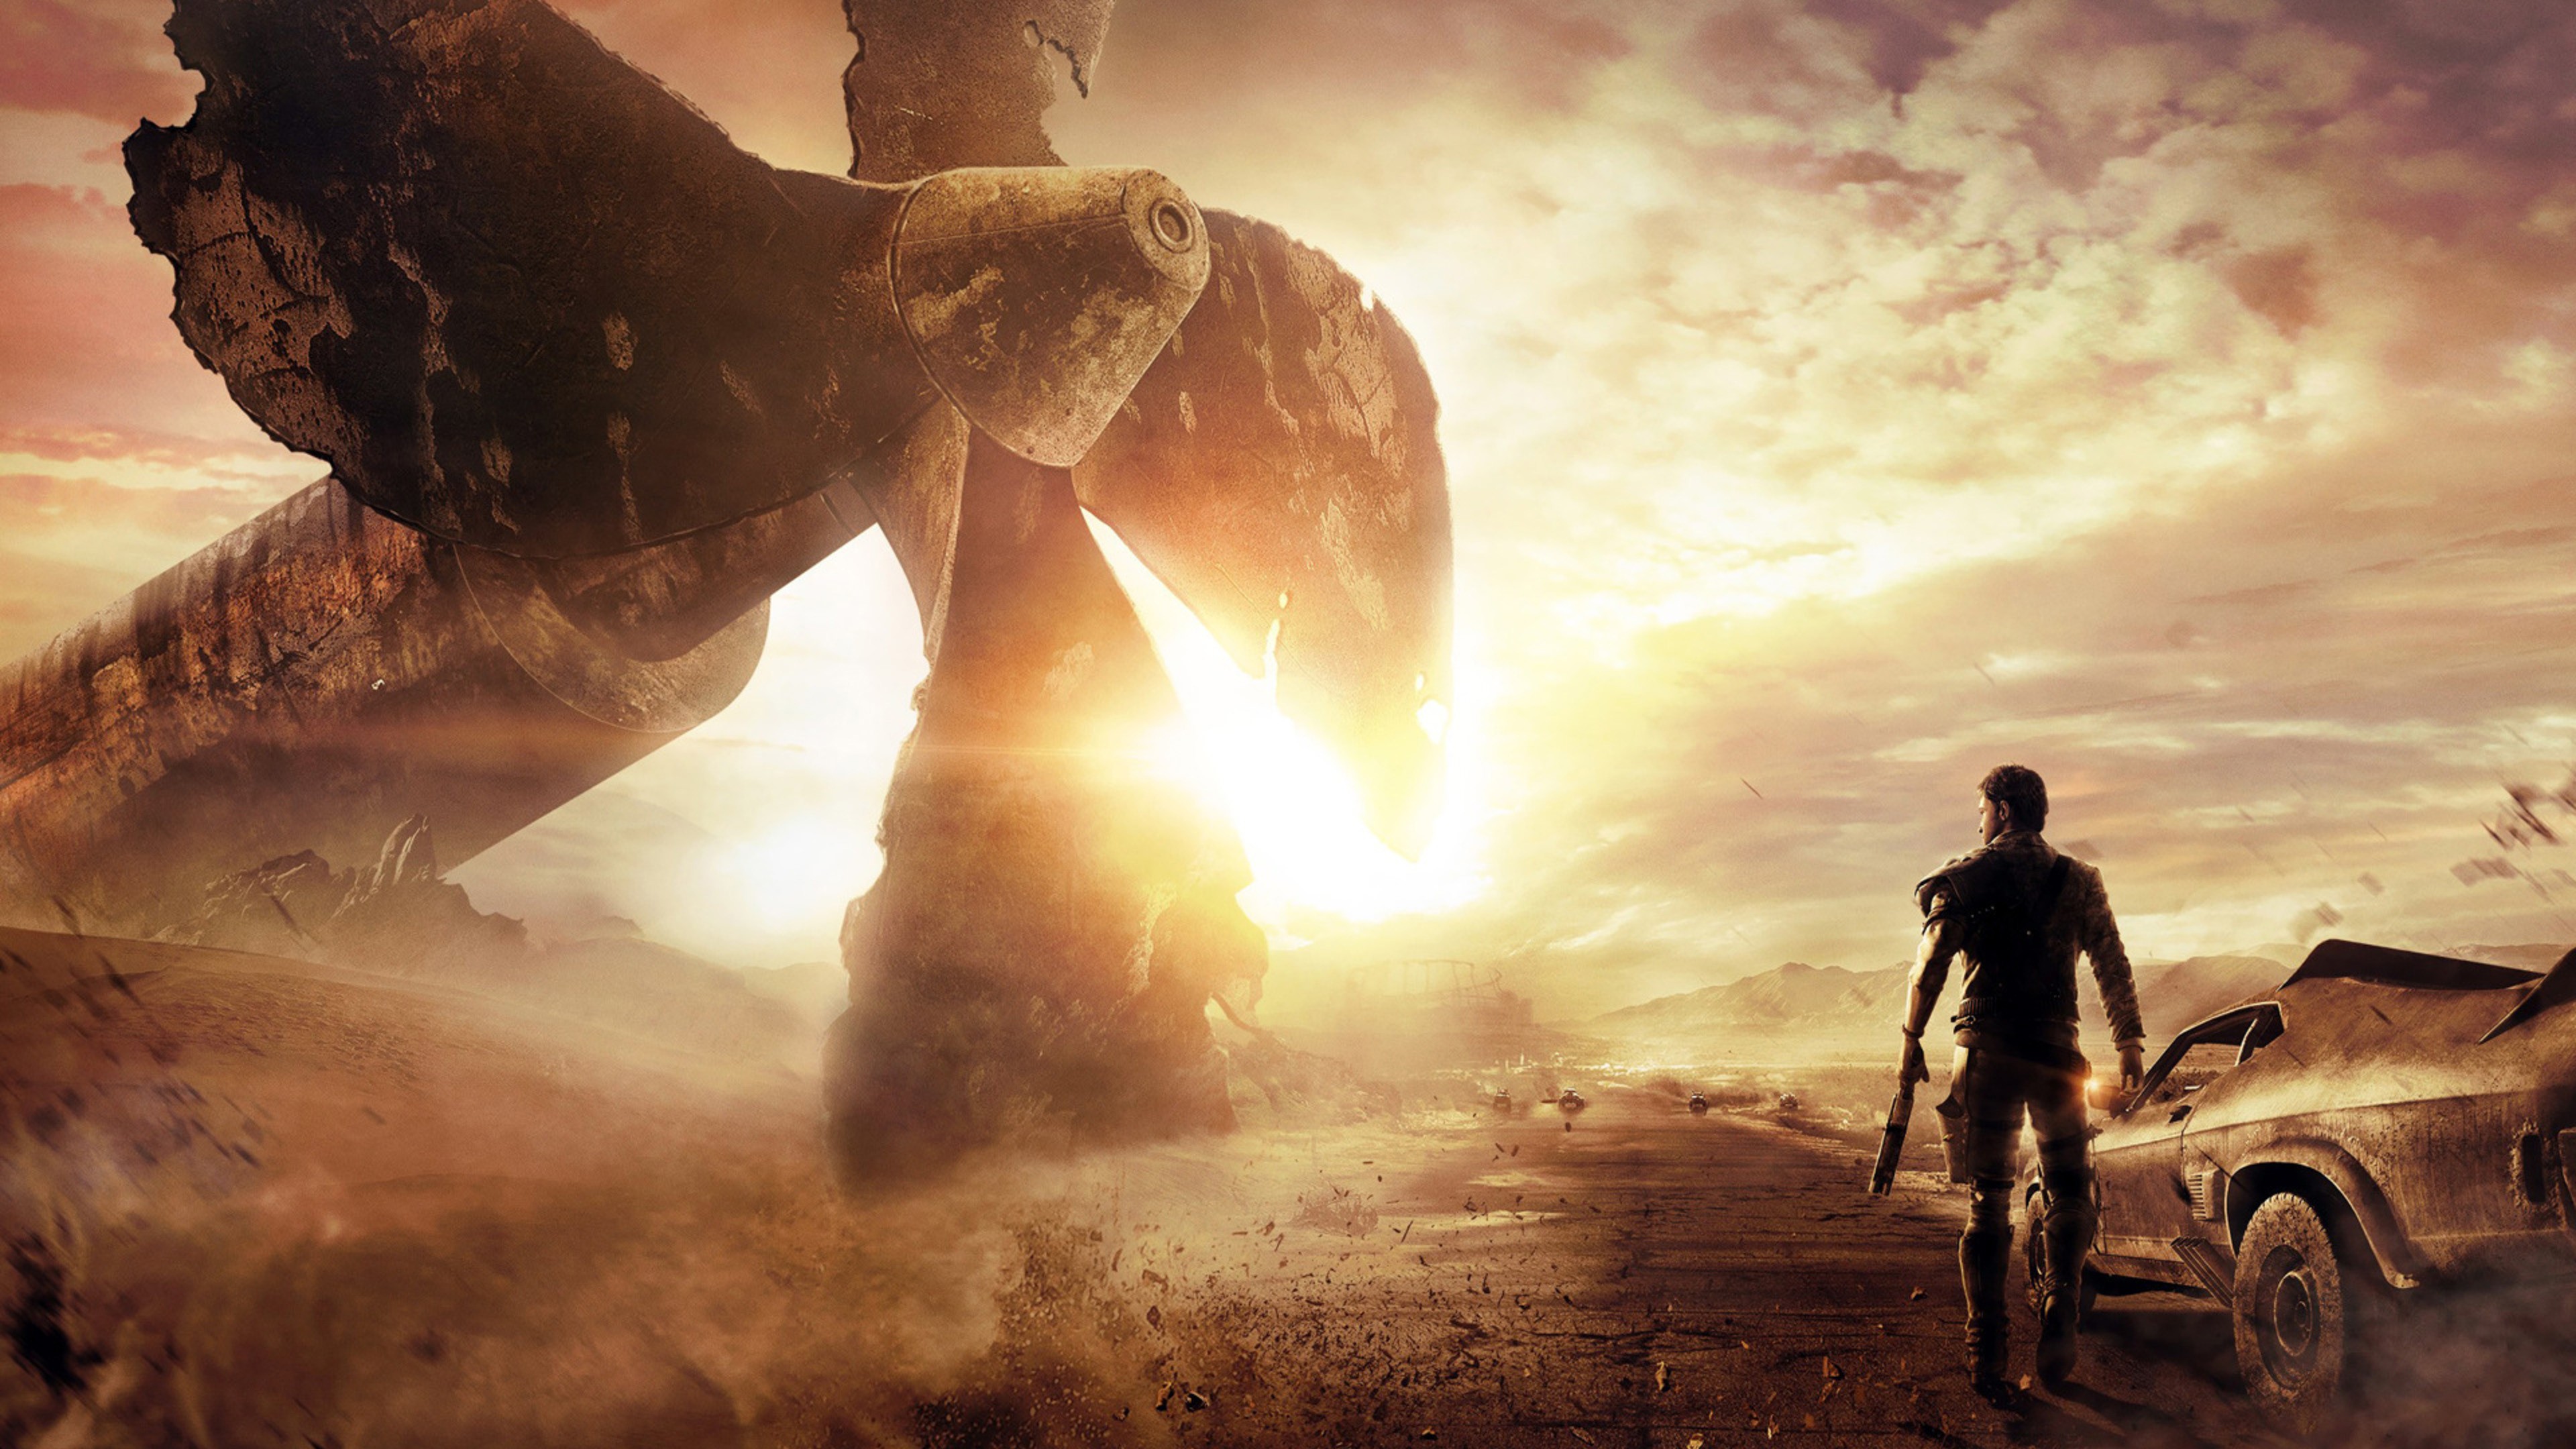 mad max game wallpaper,adaptation,vehicle,adventure game,action adventure game,dust